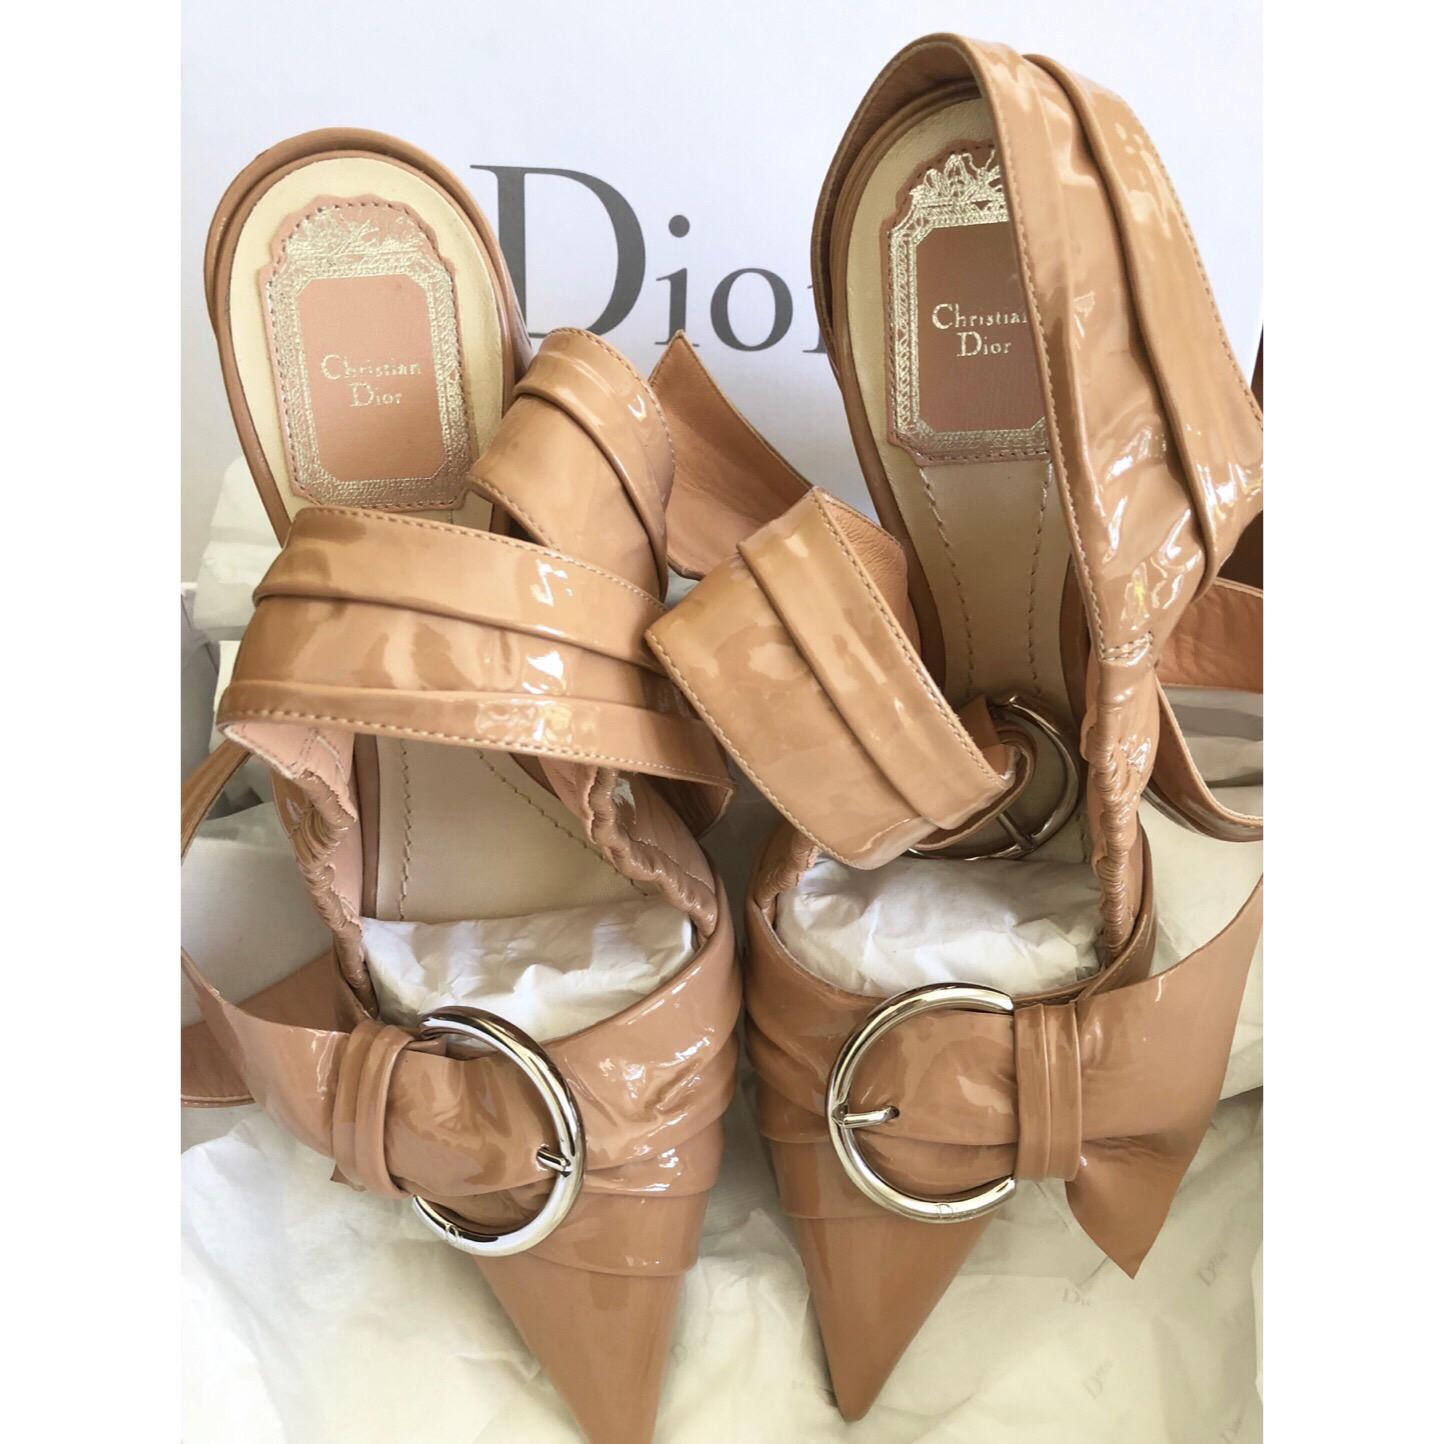 Brown Dior Conquest Nude Patent Leather Runway Shoes New in Box, 2016 Size 38